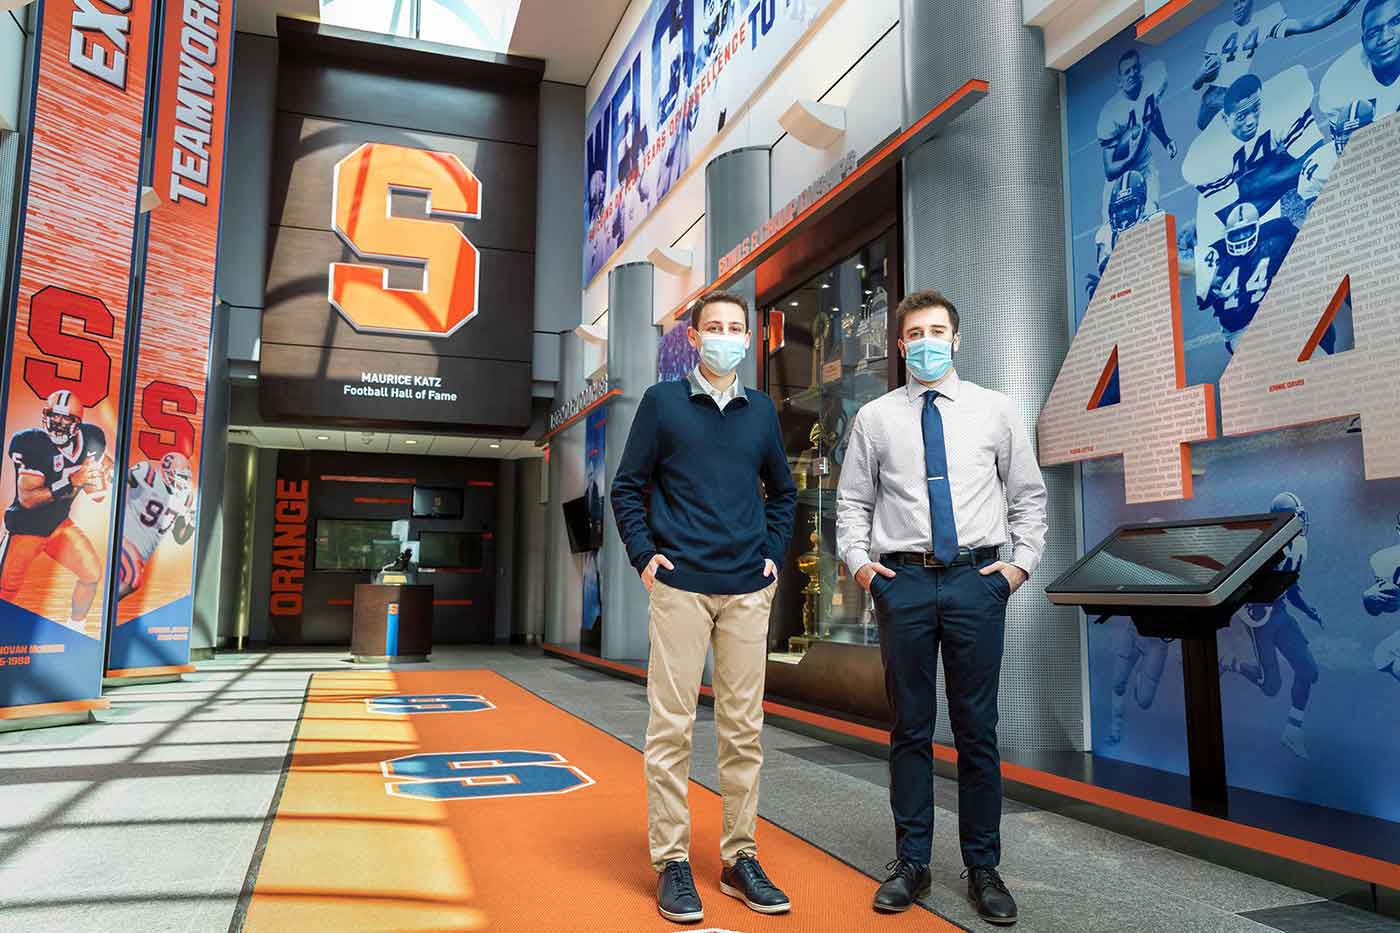 Two students stand in a sport arena lobby